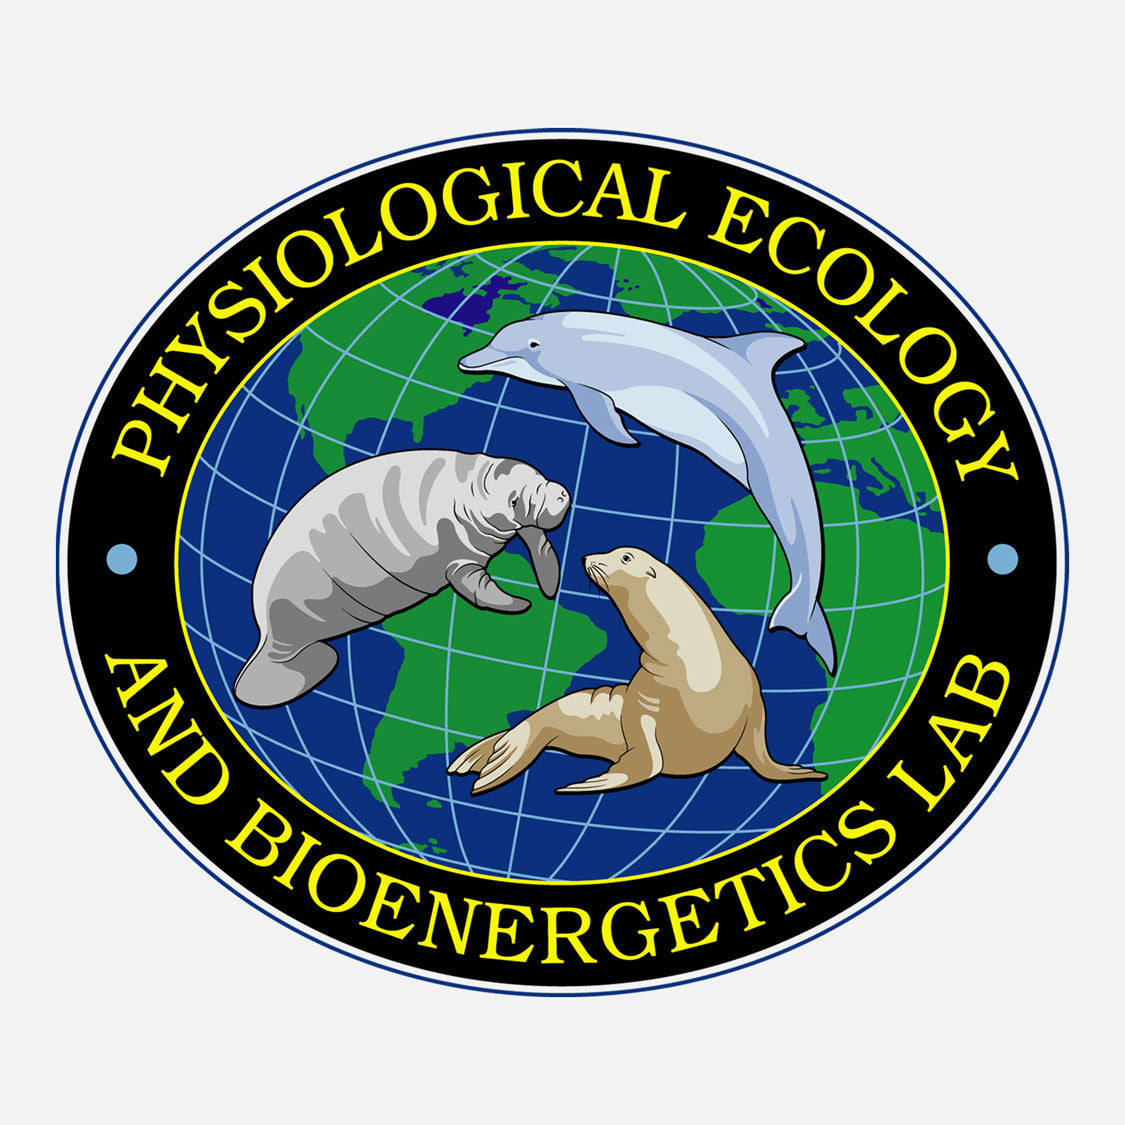 The lab is part of the Conservation Biology Program of the Department of Biology at the University of Central Florida. The logo is a graphic of a dolphin, sea lion, and manatee in front of the earth.